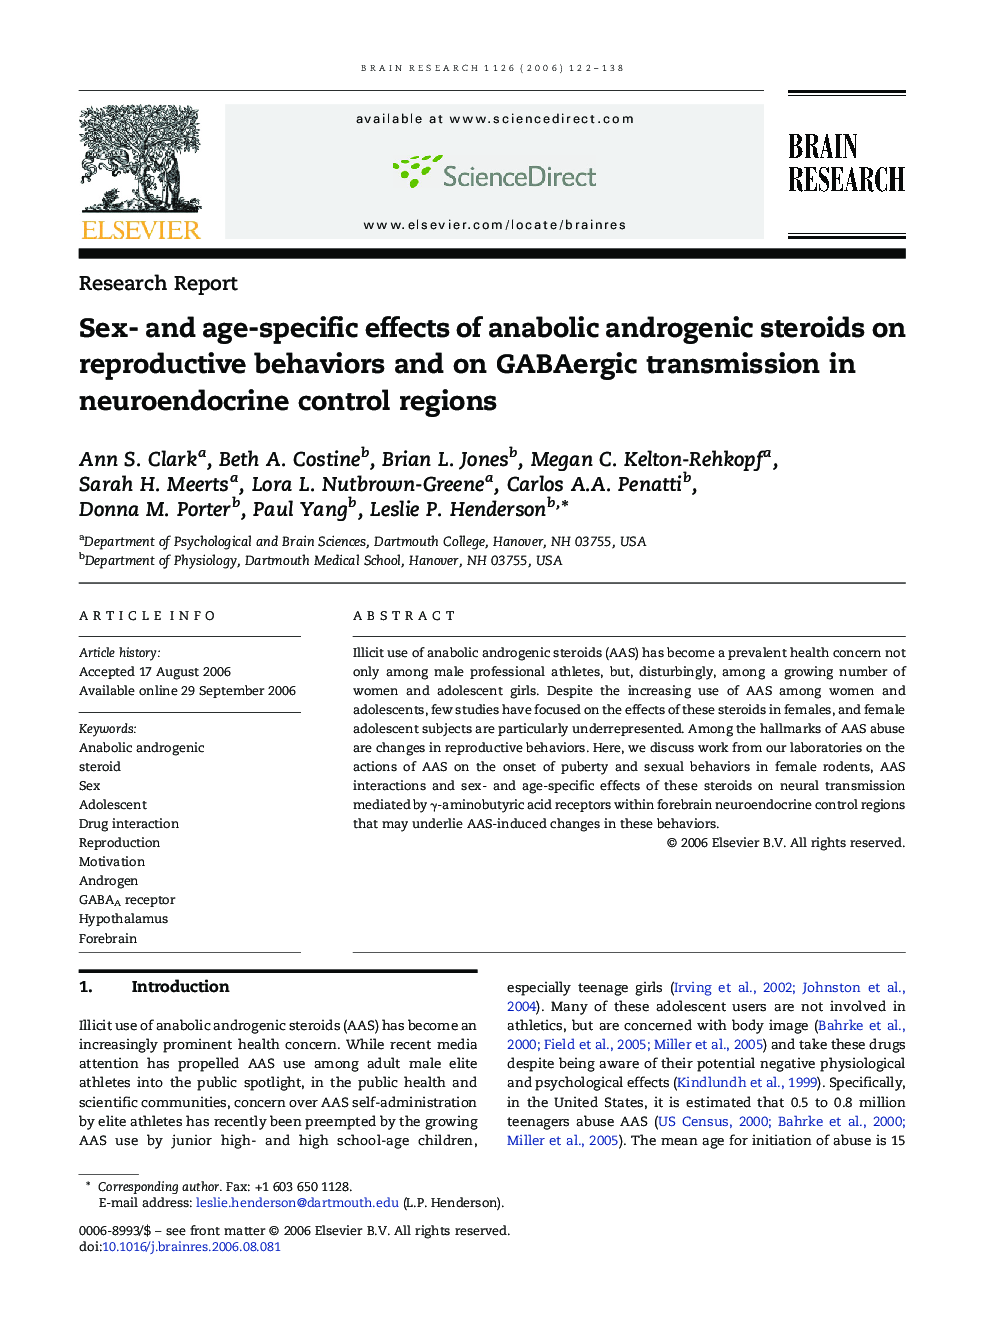 Sex- and age-specific effects of anabolic androgenic steroids on reproductive behaviors and on GABAergic transmission in neuroendocrine control regions